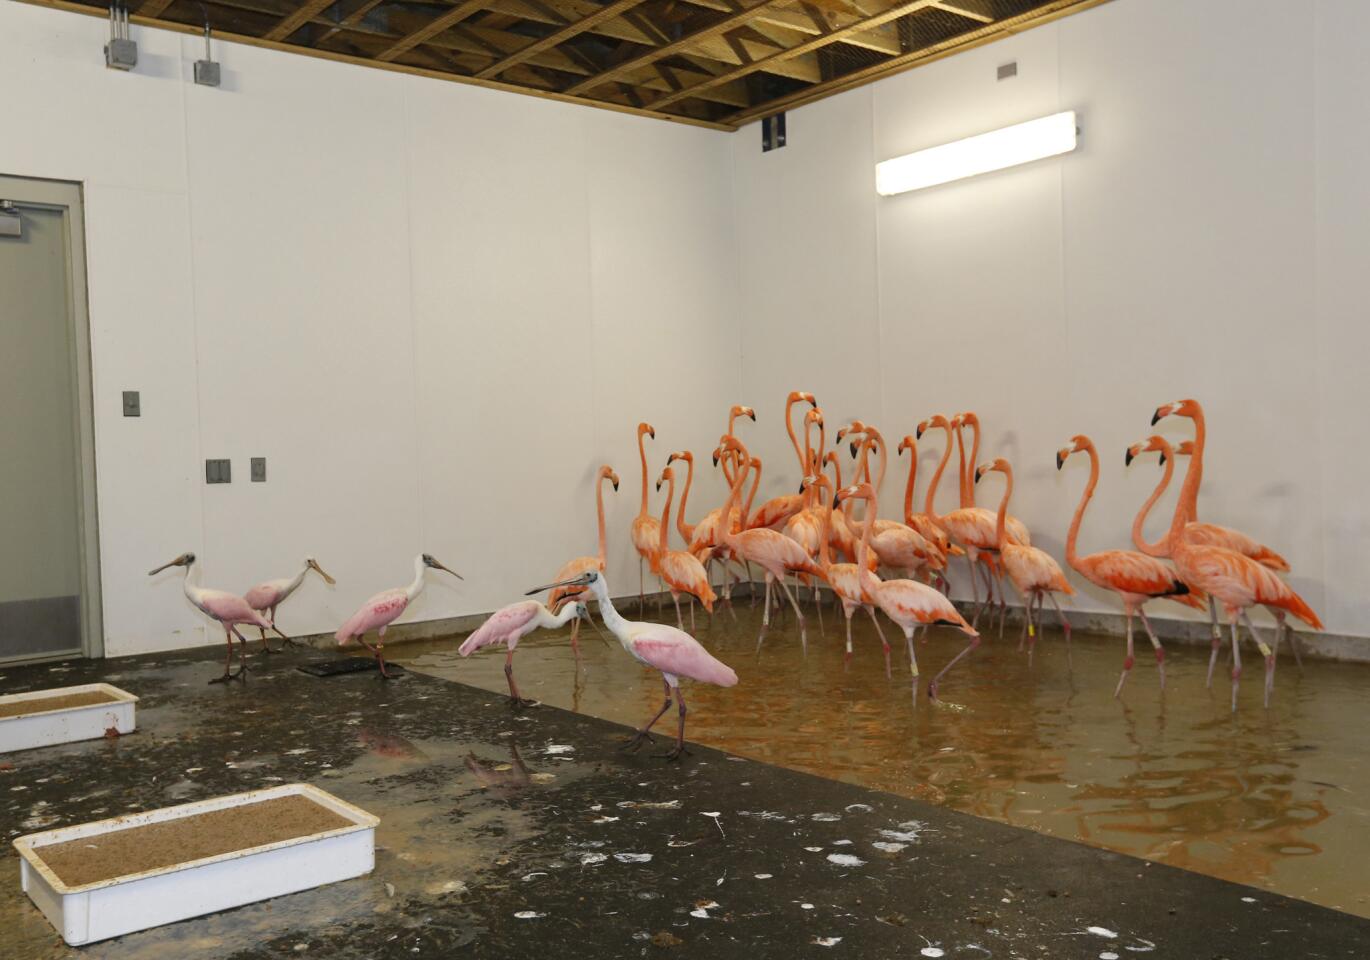 Flamingos and roseate spoonbills, left foreground, share a temporary enclosure in a hurricane-resistant structure within the Miami zoo on Sept. 9, 2017.